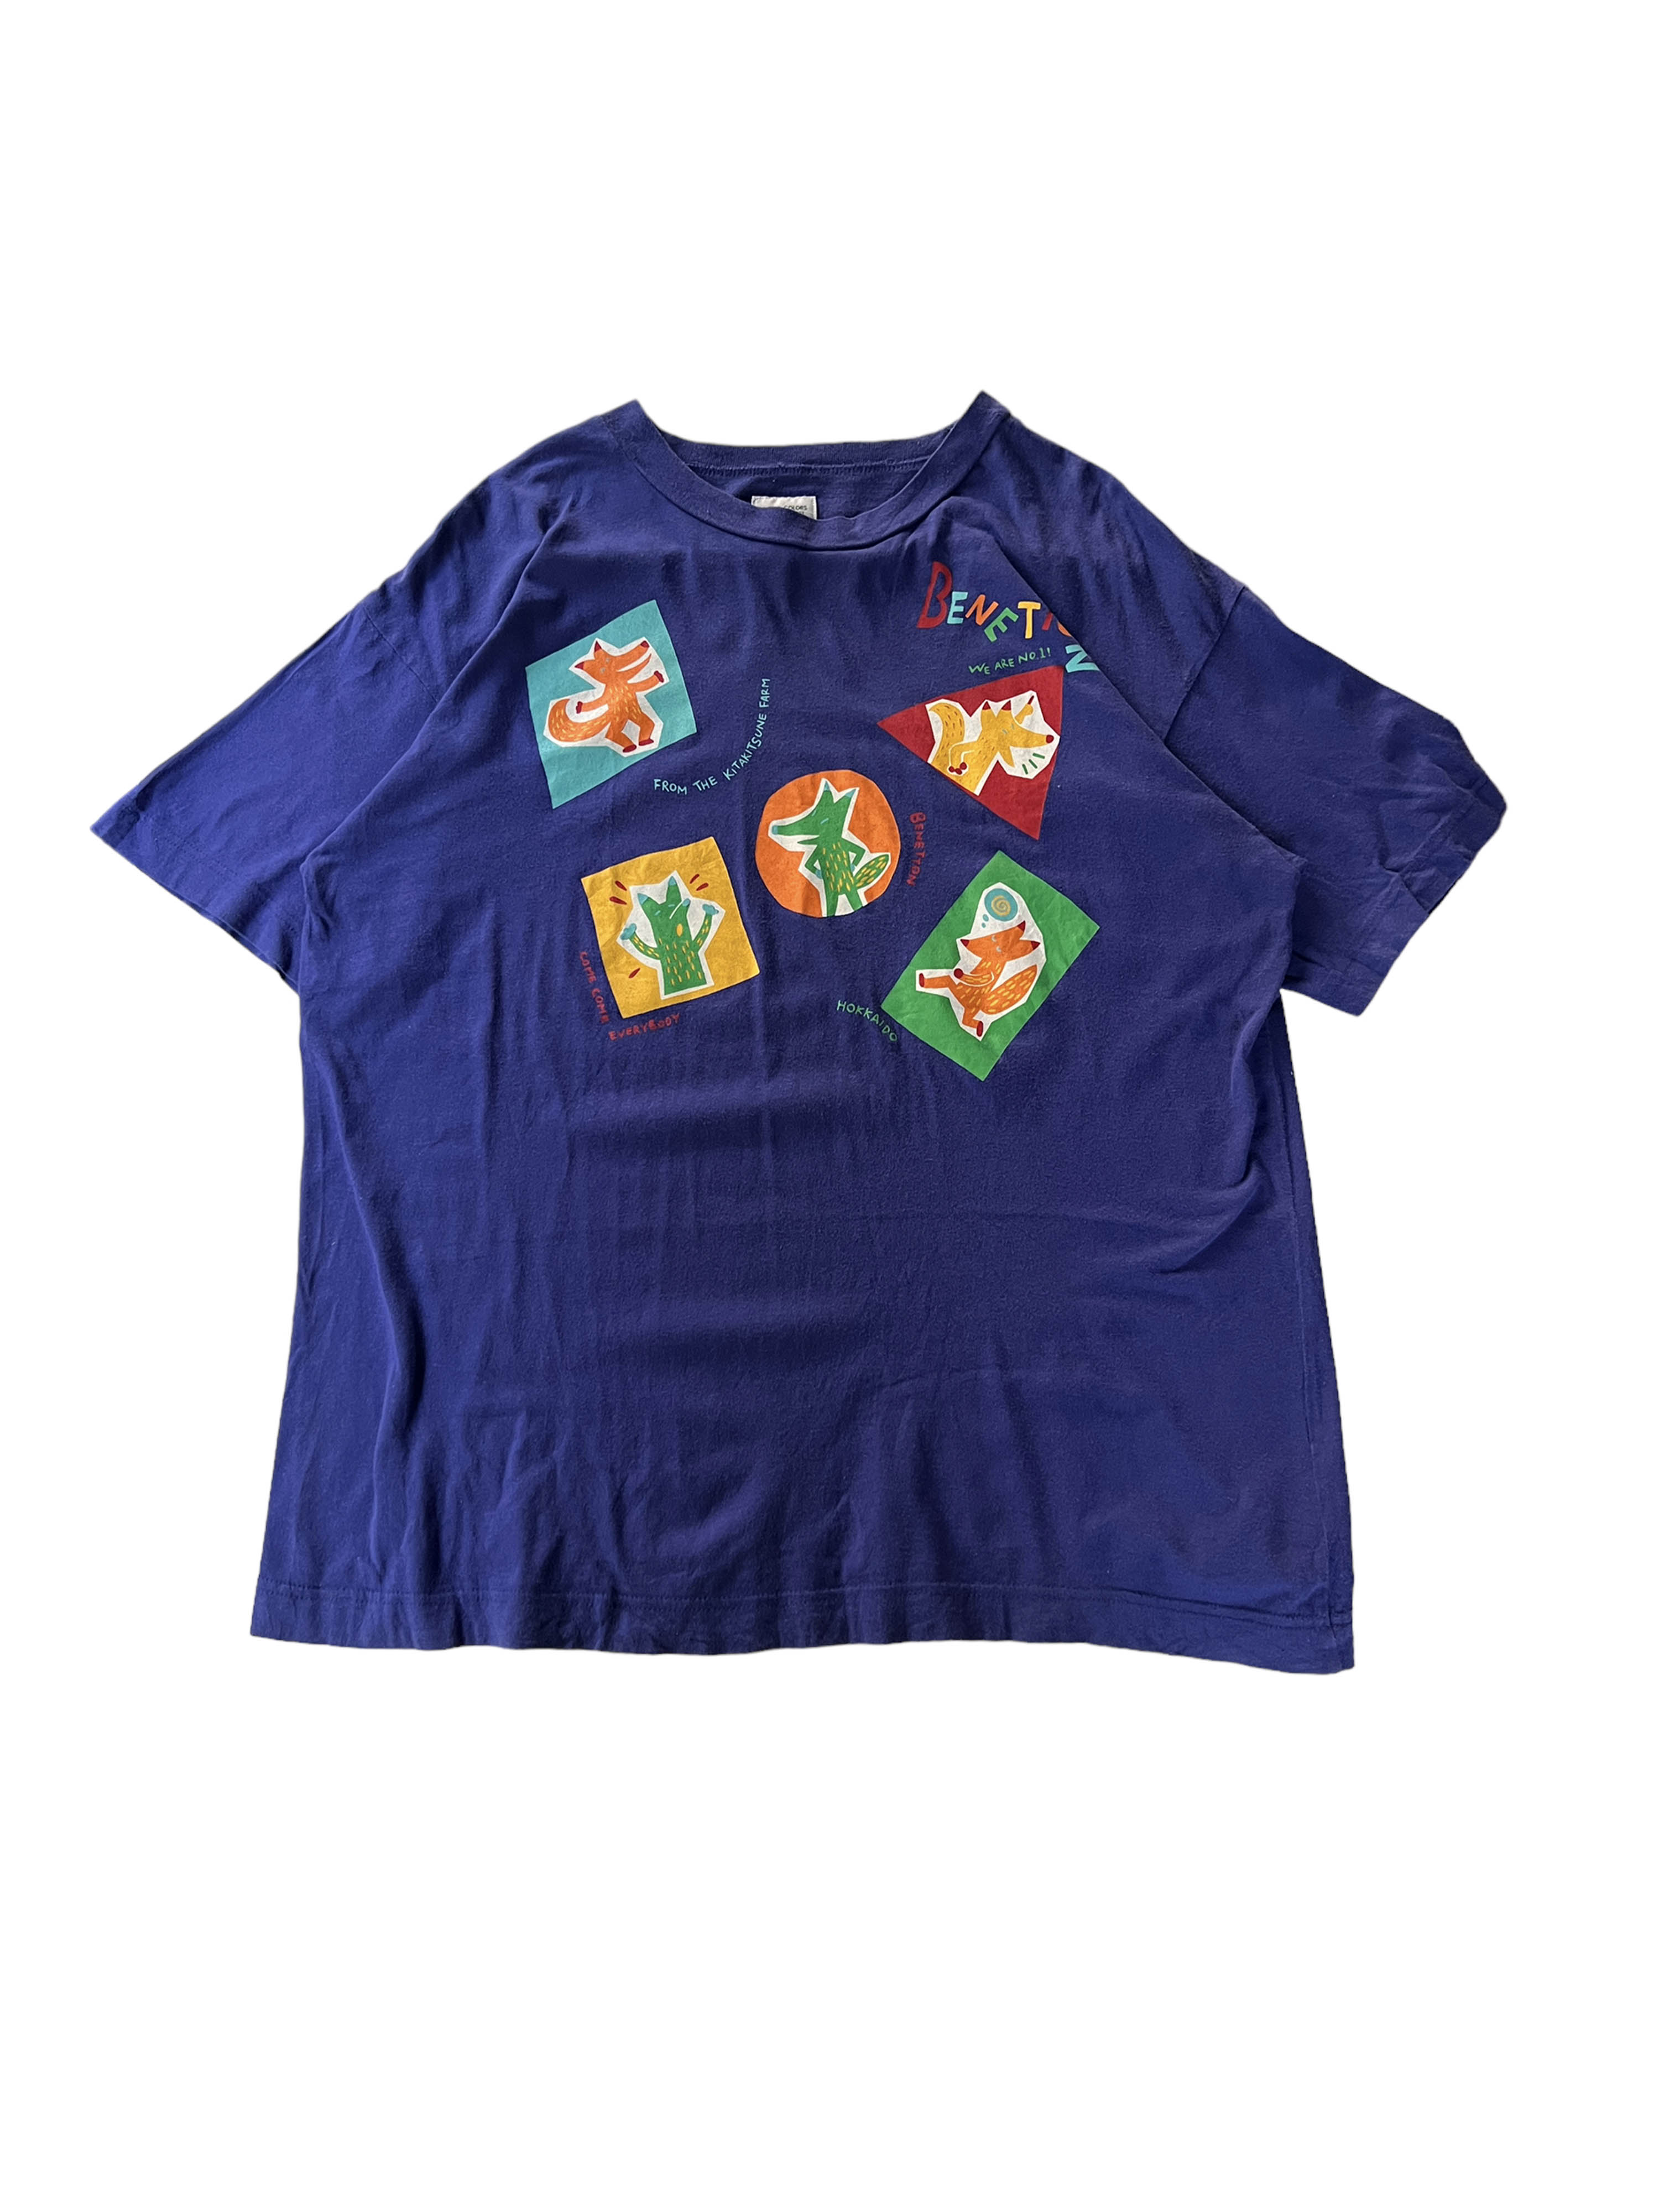 UNITED COLOR OF BENETTON pattern t-shirts